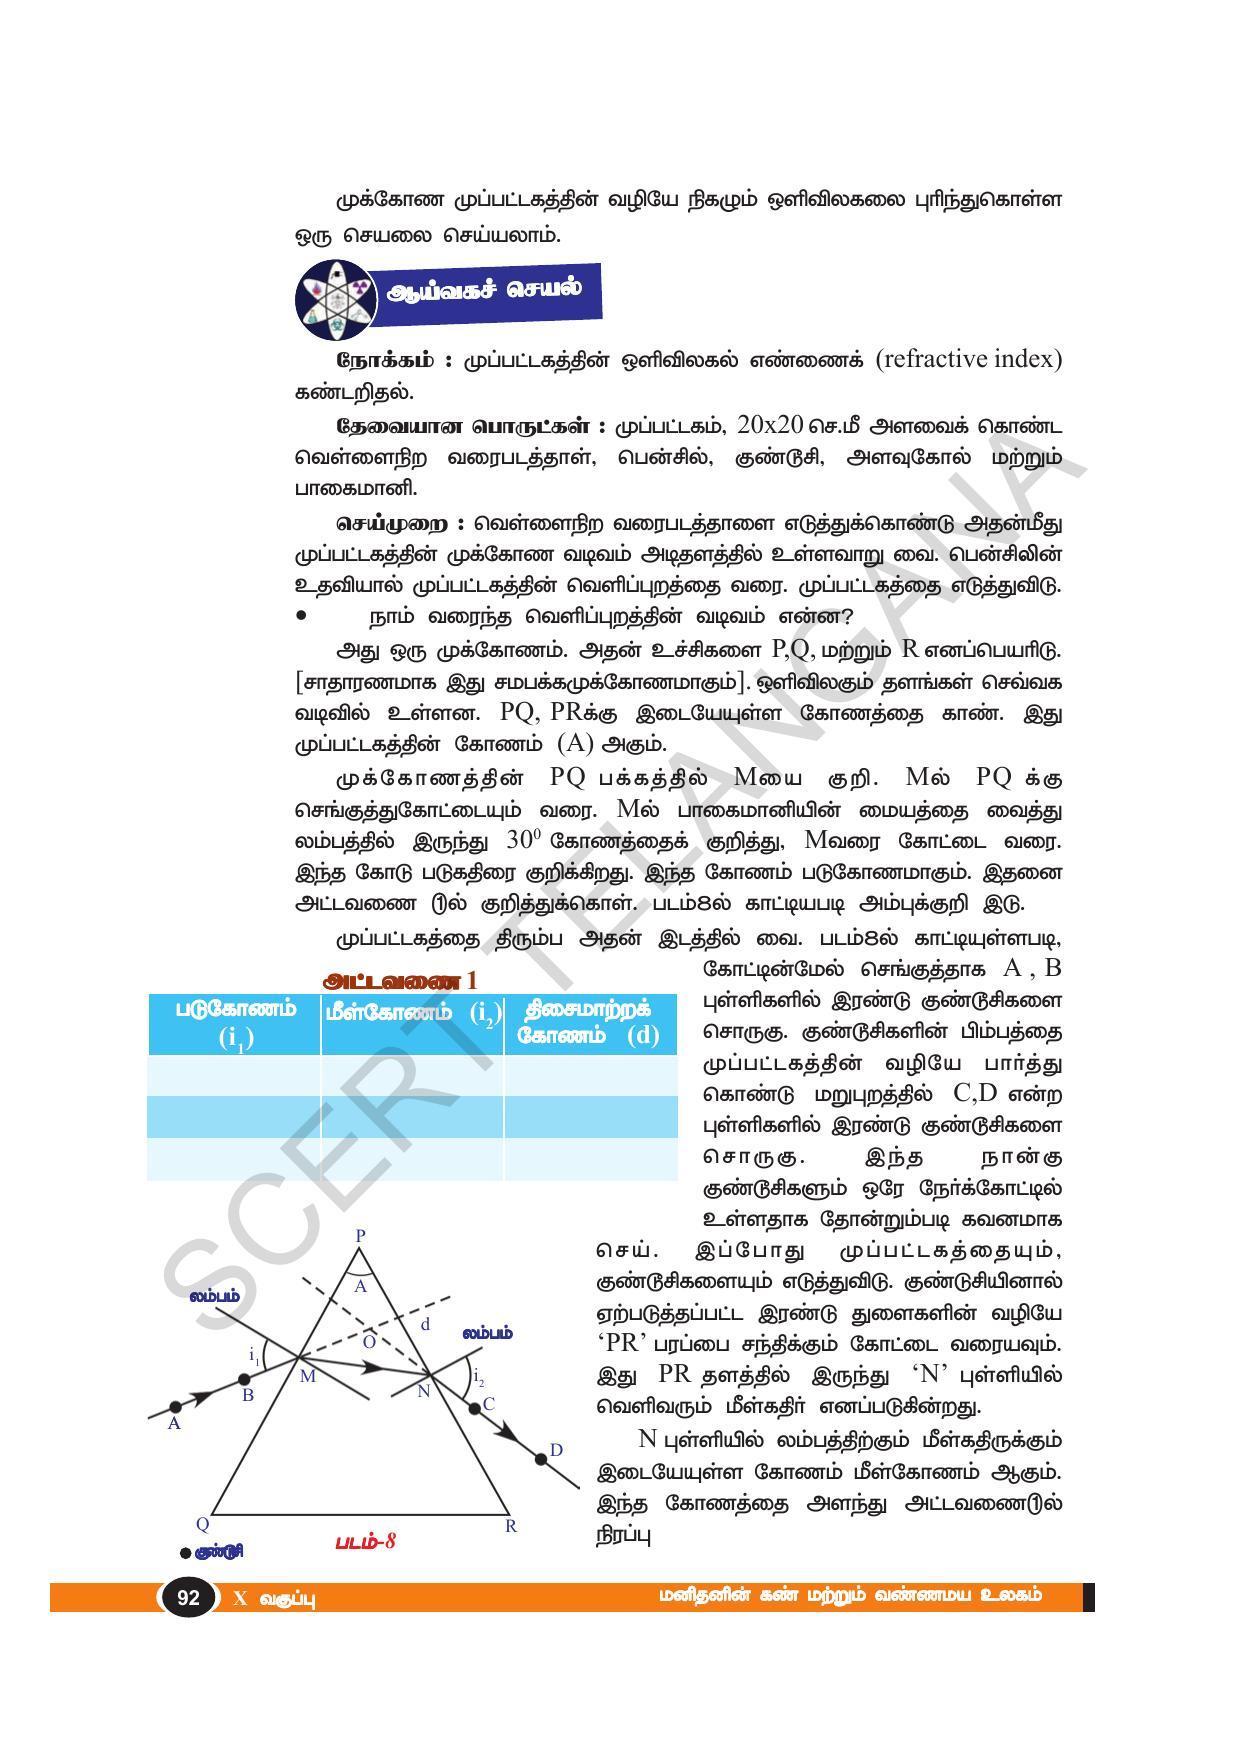 TS SCERT Class 10 Physical Science(Tamil Medium) Text Book - Page 104